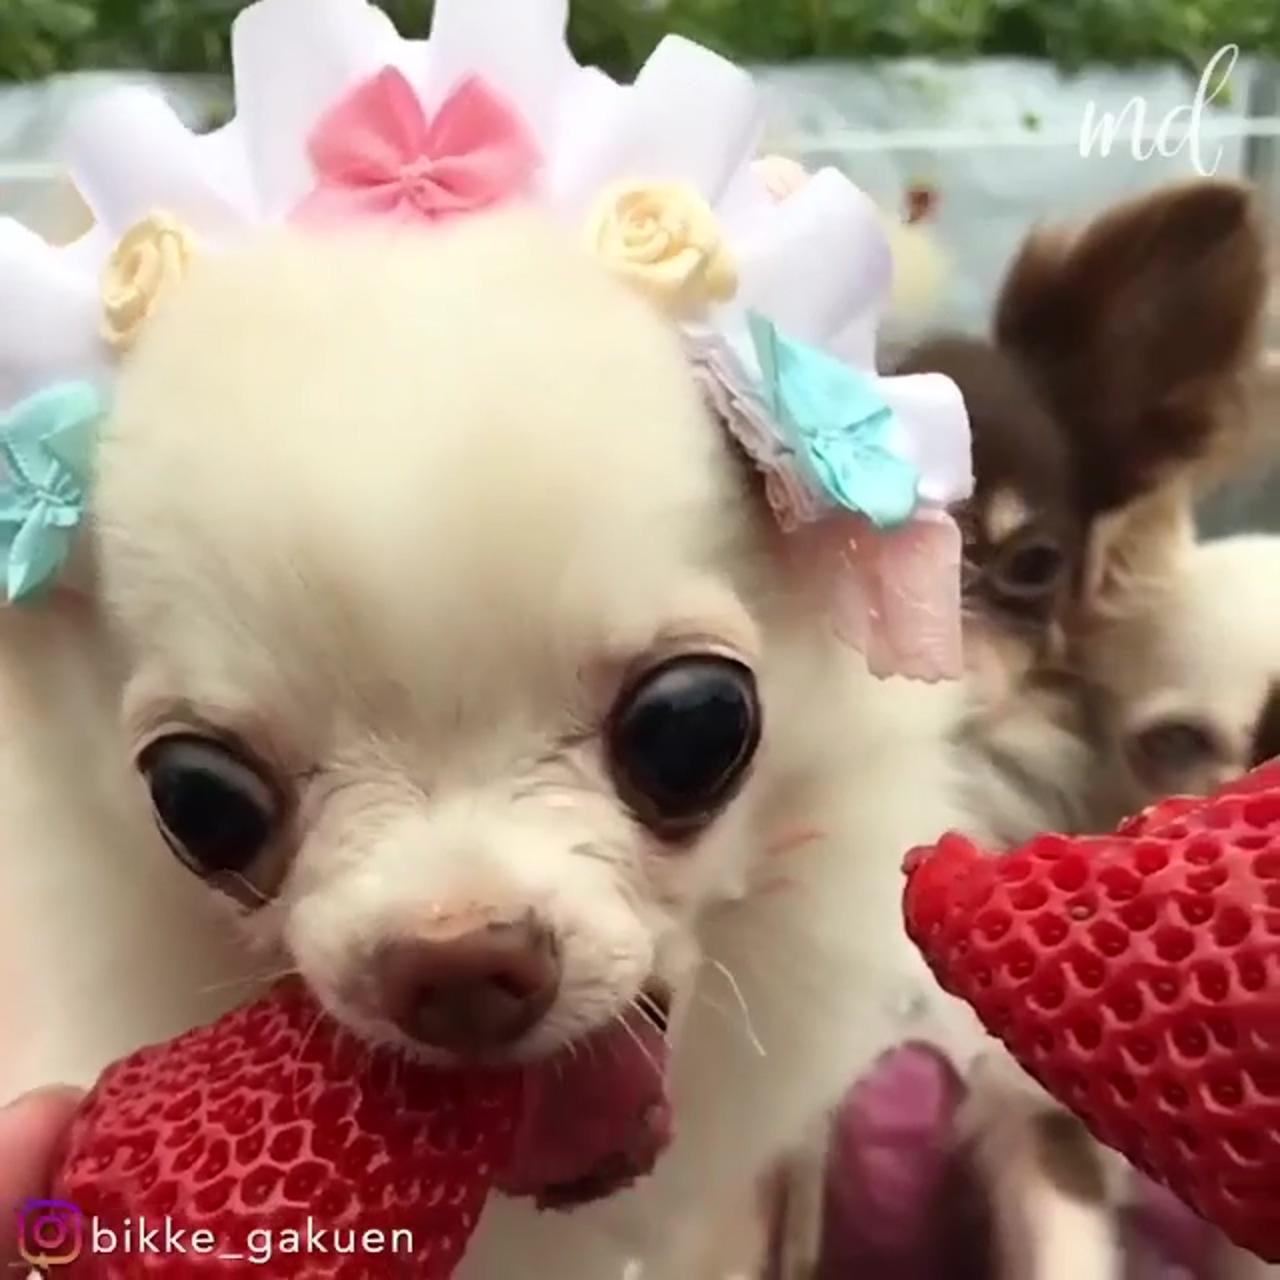 Chihuahua eats strawberry passionately in slow motion | bear face